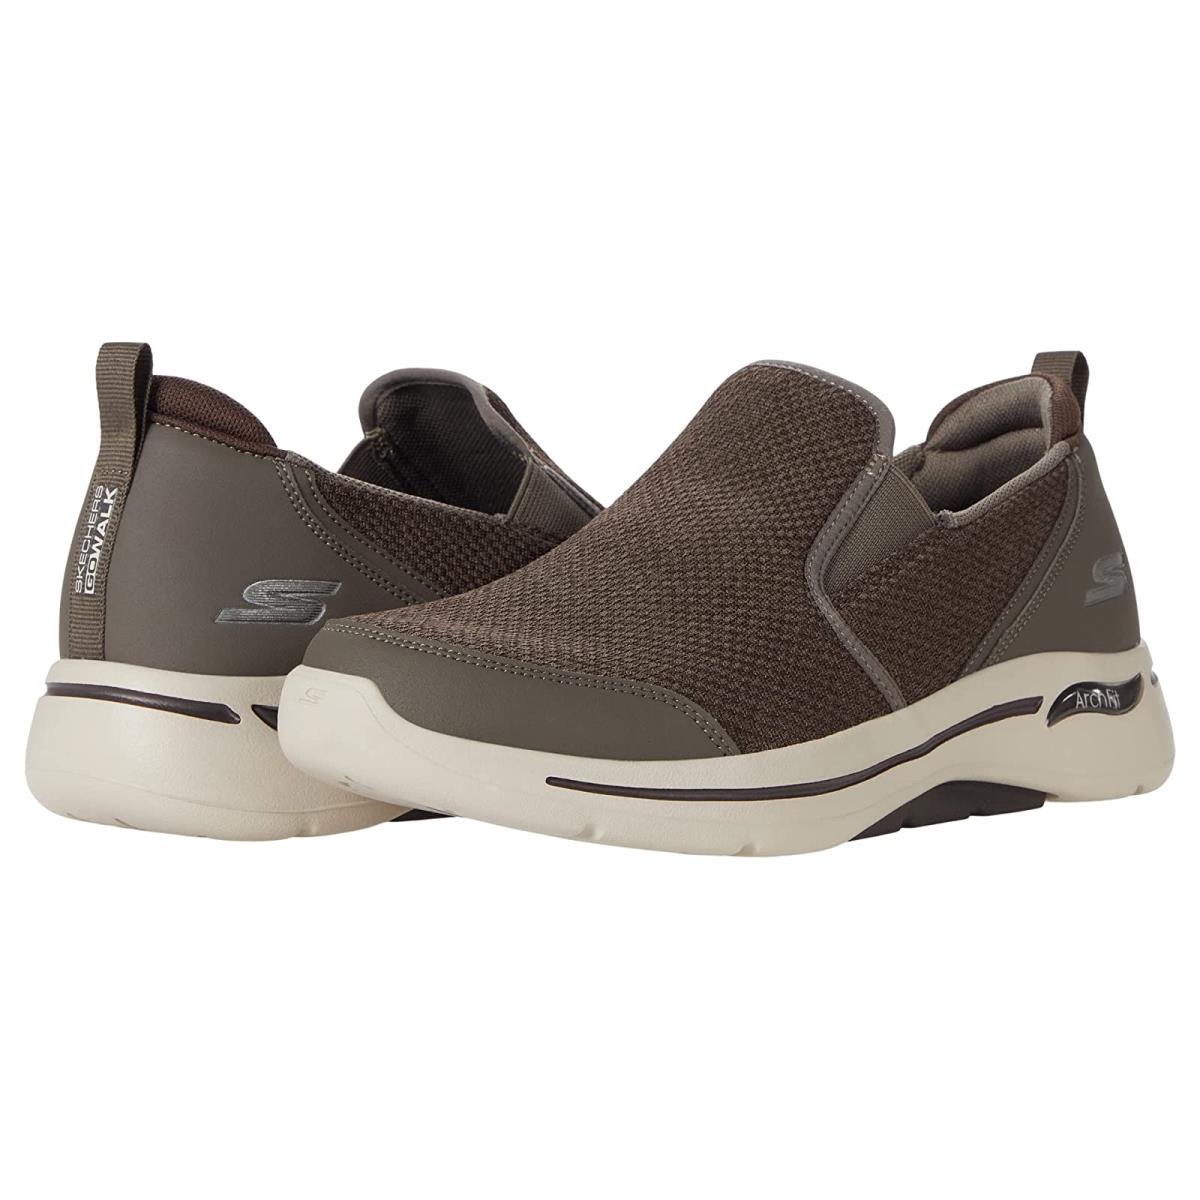 Man`s Shoes Skechers Performance Go Walk Arch Fit - Goodman Taupe